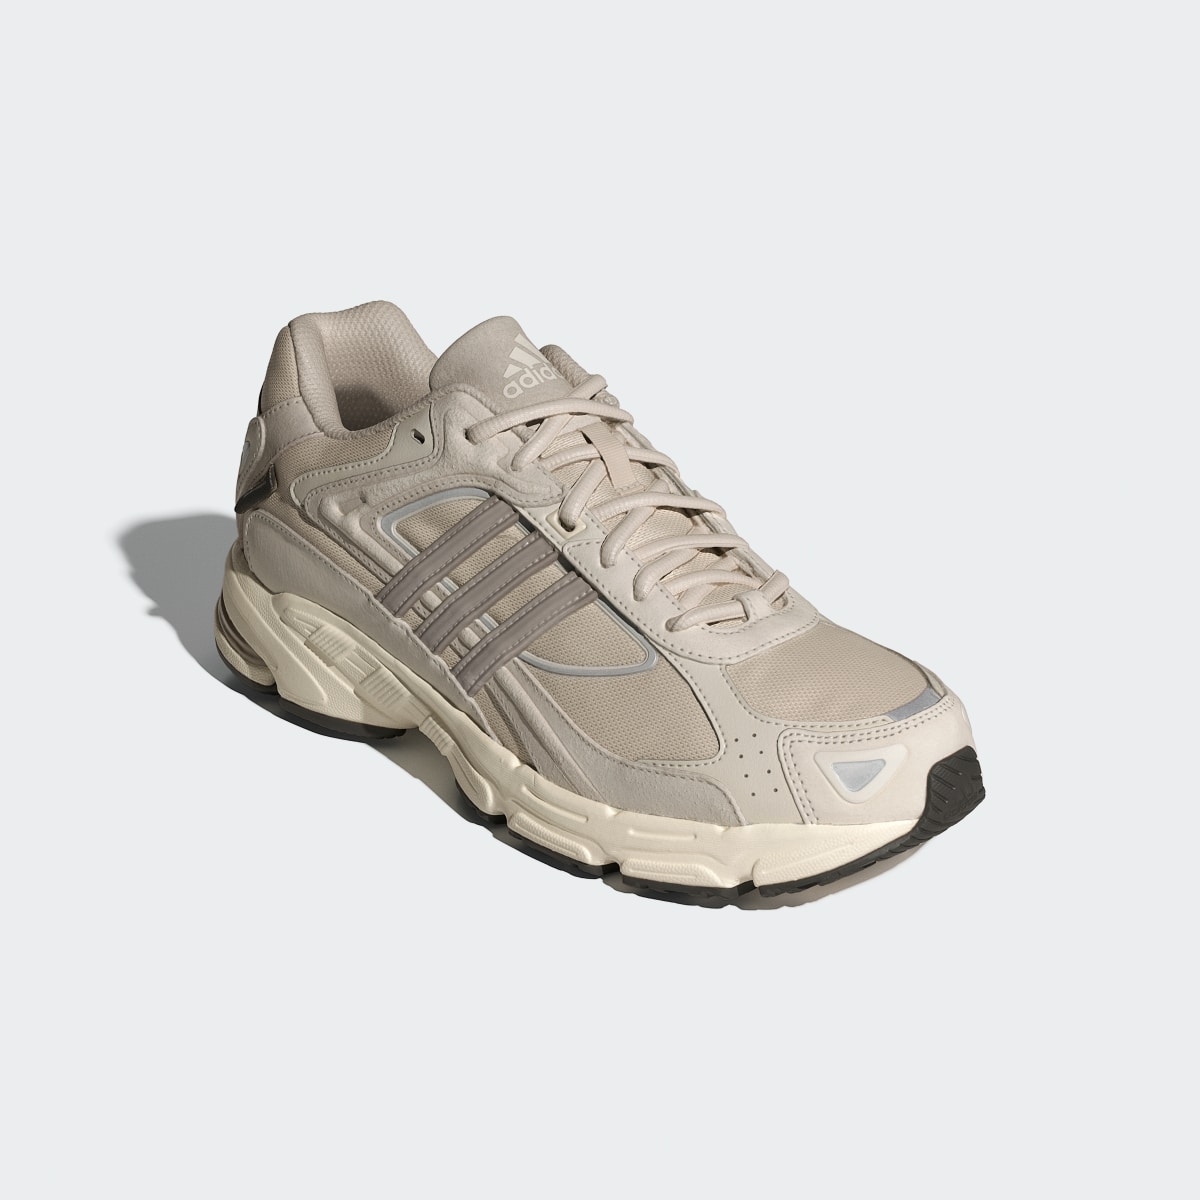 Adidas Chaussure Response CL. 4